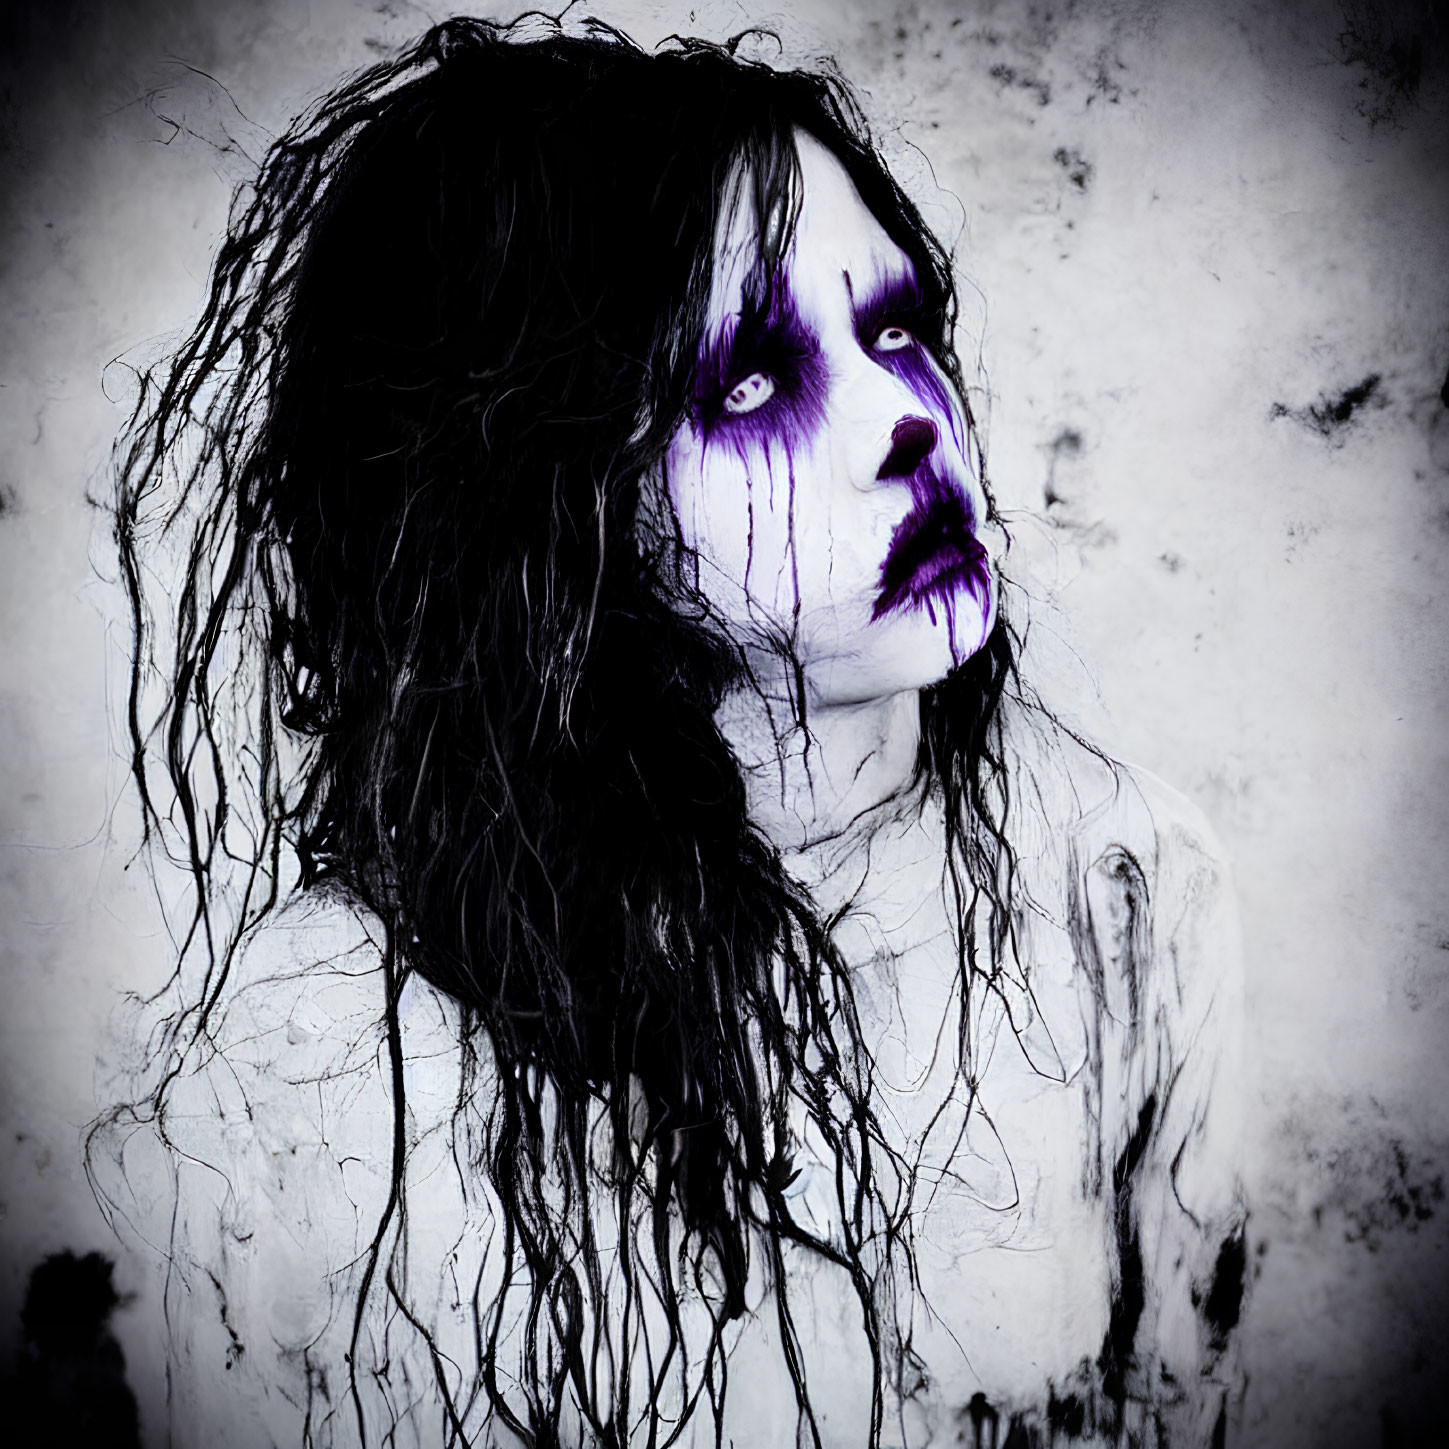 Dark Hair and Gothic Makeup with Purple Accents